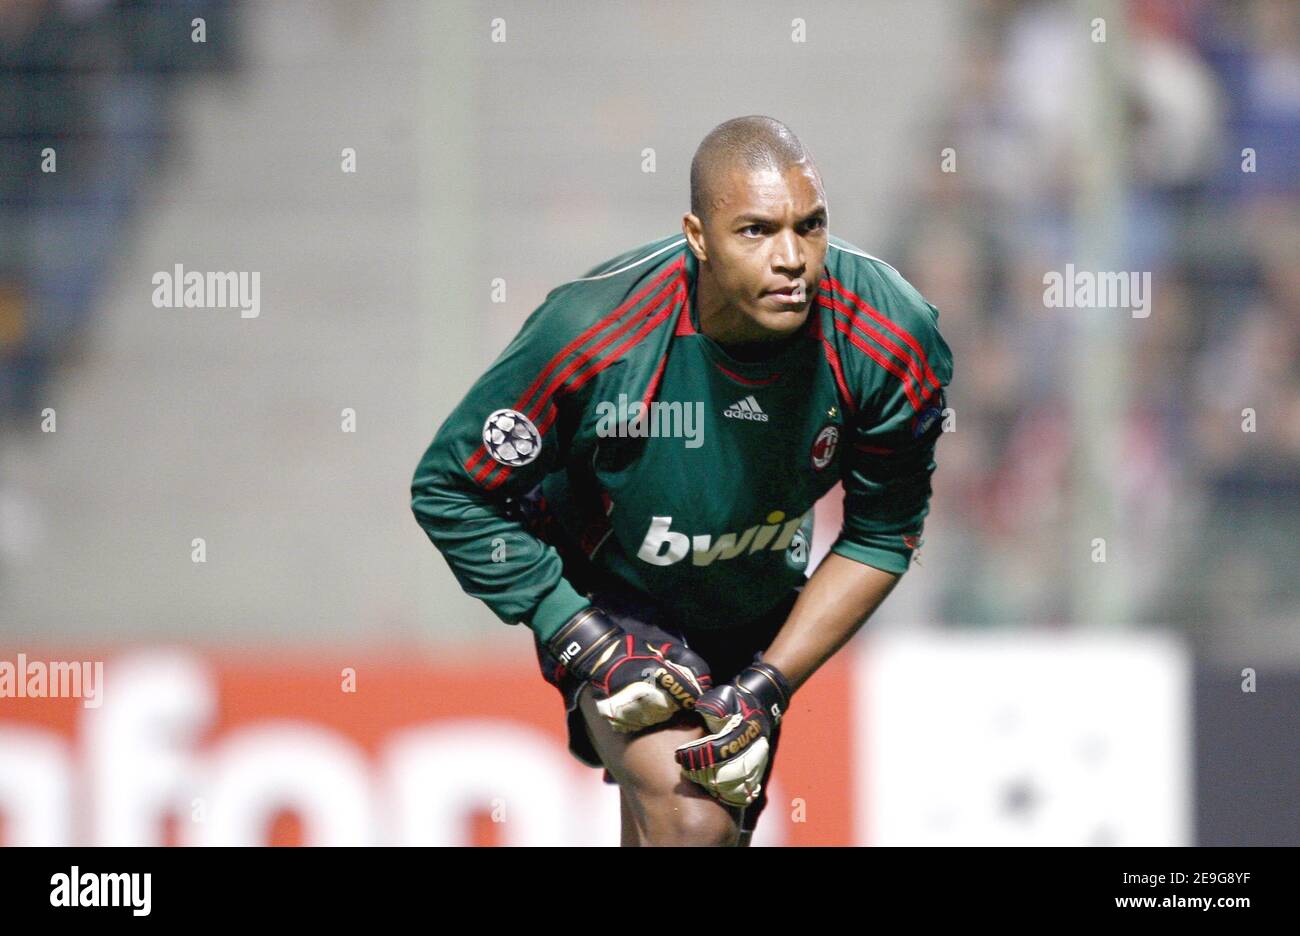 Milan's goalkeeper Dida during the UEFA Champions League, Group H, AC Milan  vs LOSC Lille at the Felix Bollaert Stadium in Lens, France on September  26, 2006. The match ended in a